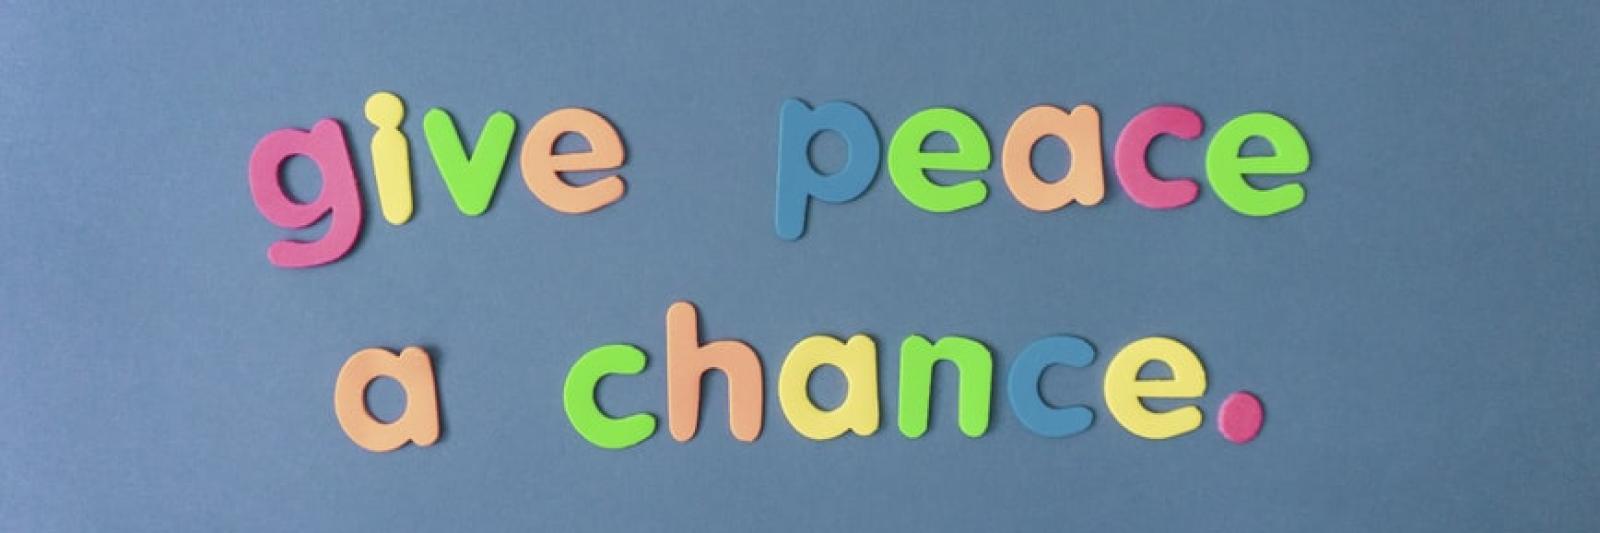 give peace a chance